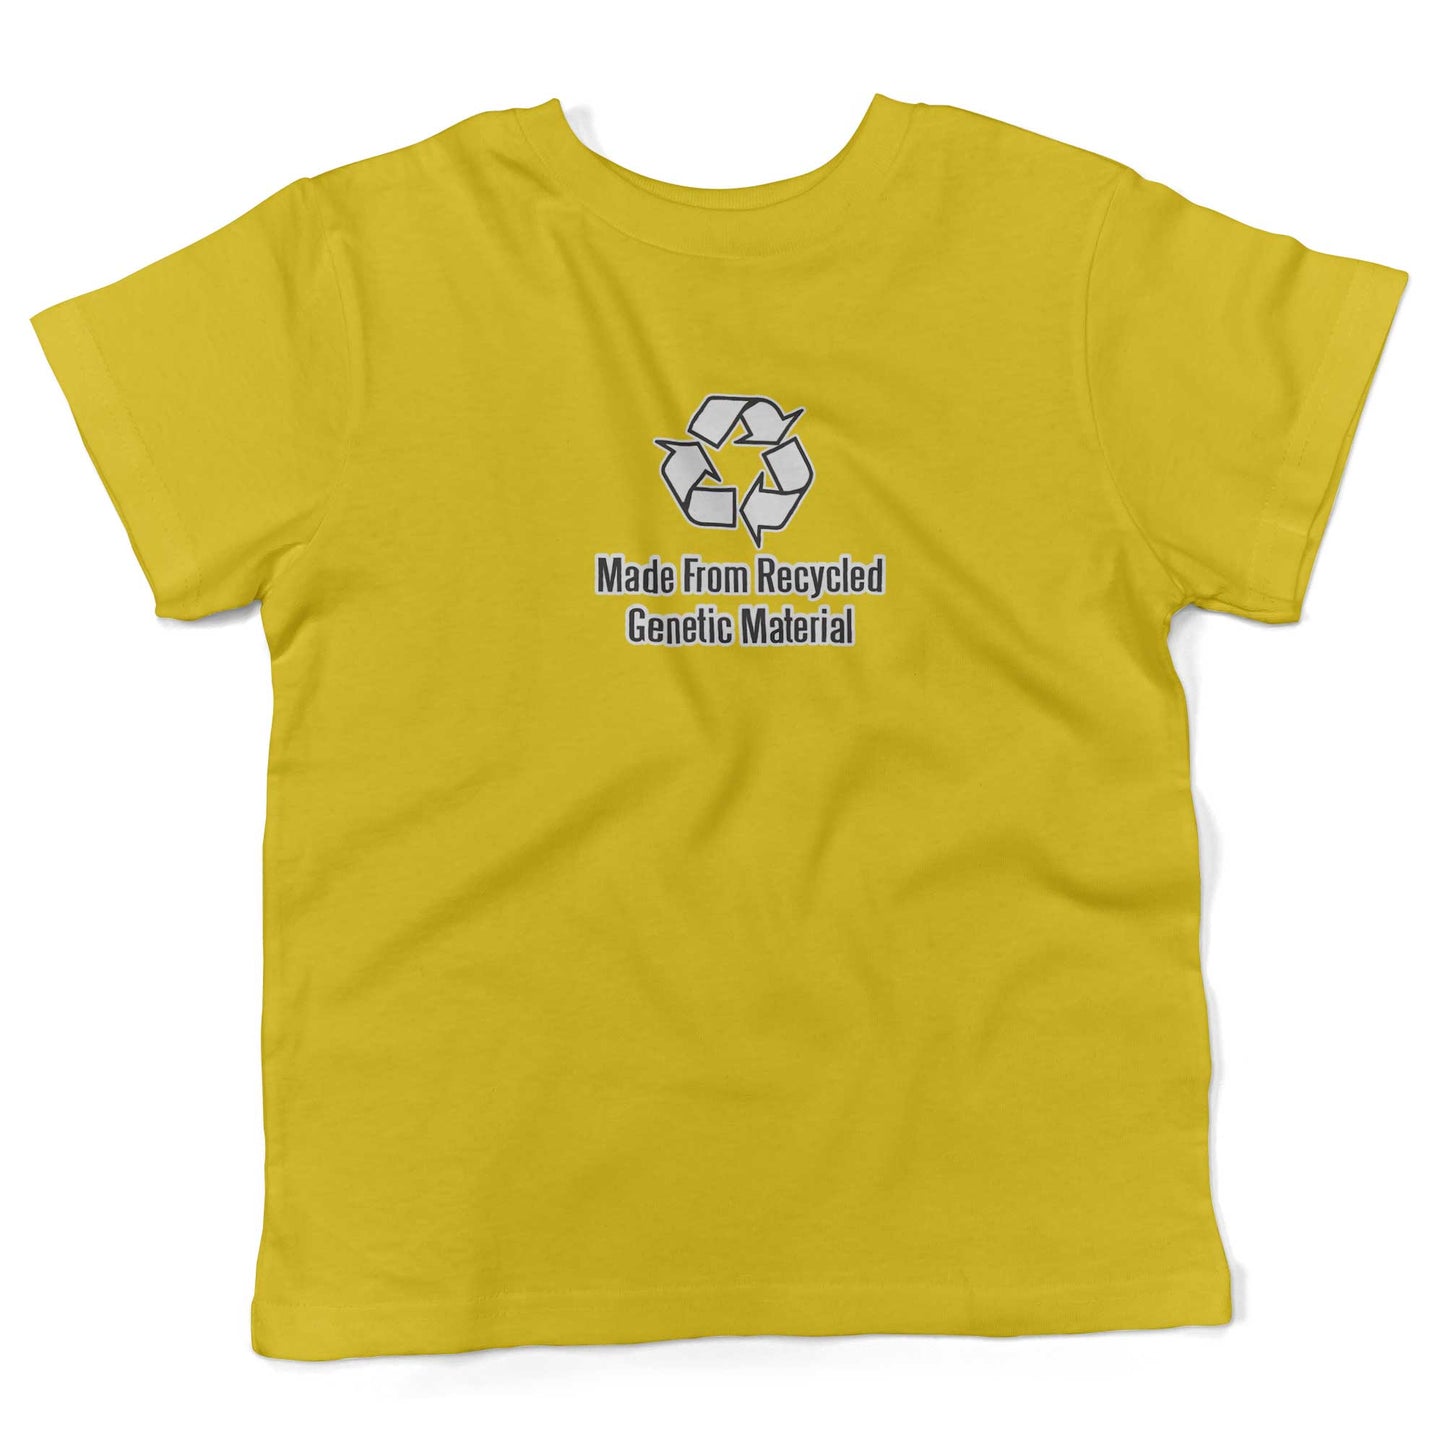 Made From Recycled Materials Toddler Shirt-Sunshine Yellow-2T